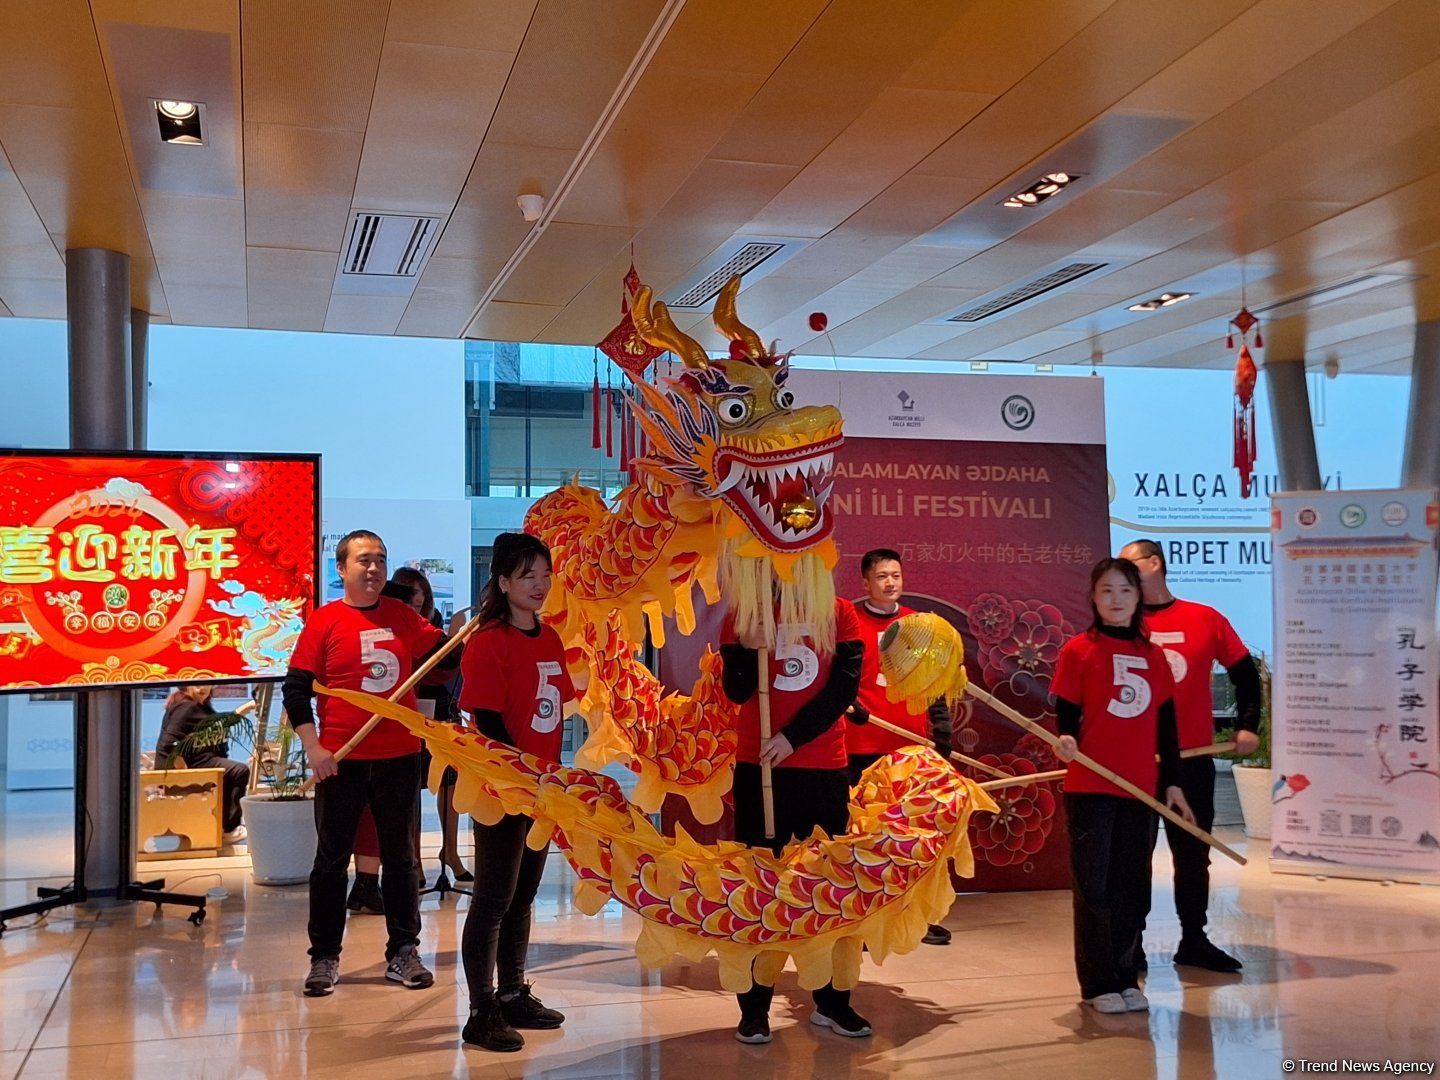 National Carpet Museum celebrates Chinese New Year [PHOTOS/VIDEO]